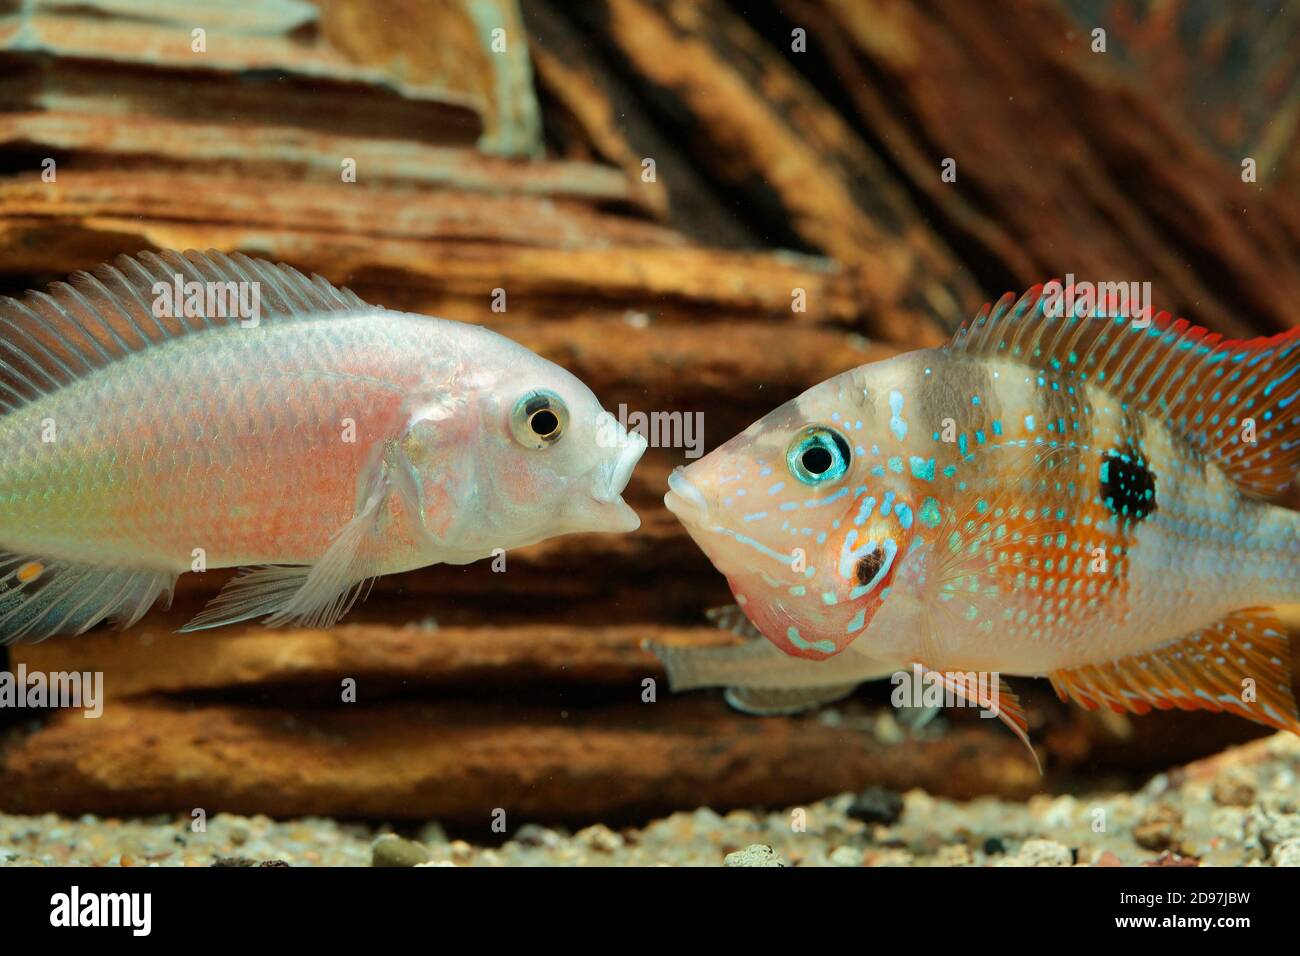 Confrontation between a male Haplochromis (Haplochromis sp) 'salmon' and a Firemouth (Thorichthys maculipinnis) in aquarium Stock Photo